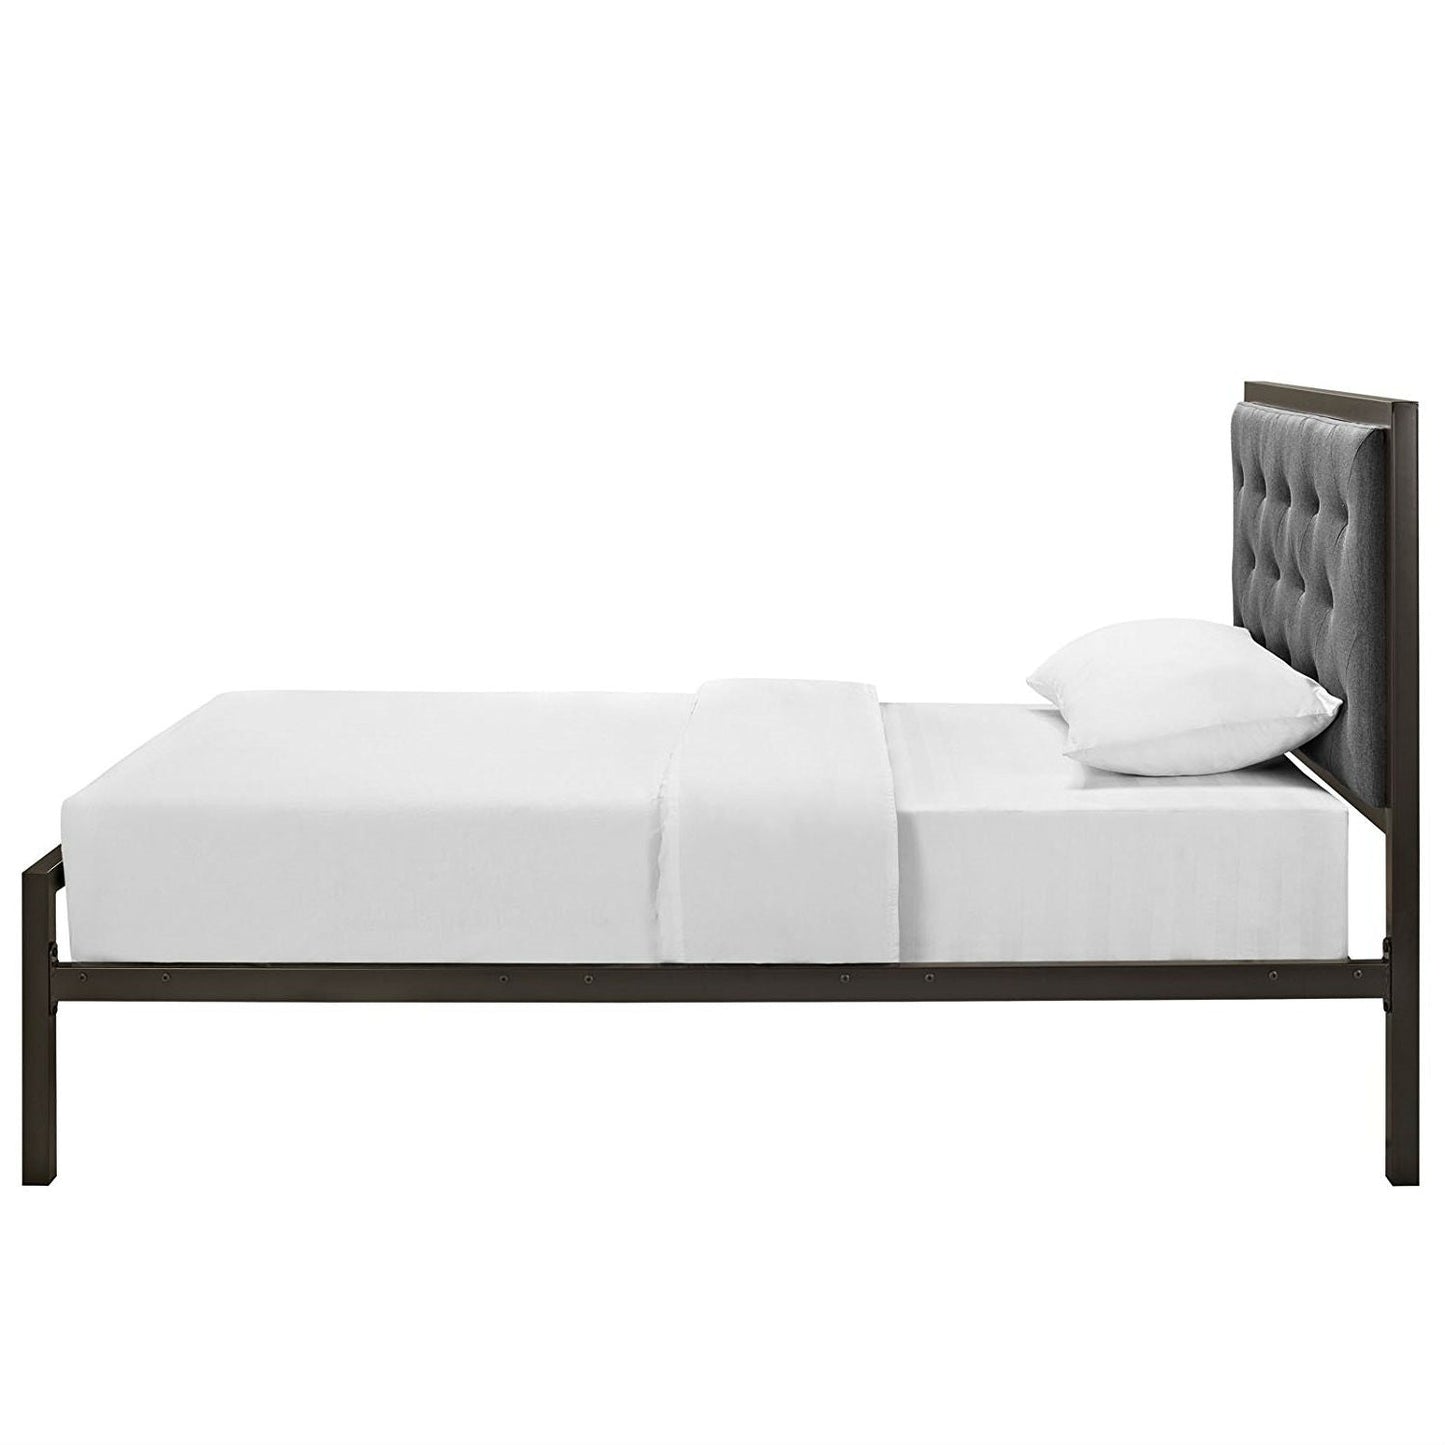 Bedroom > Bed Frames > Platform Beds - Twin Metal Platform Bed With Gray Fabric Button Tufted Upholstered Headboard